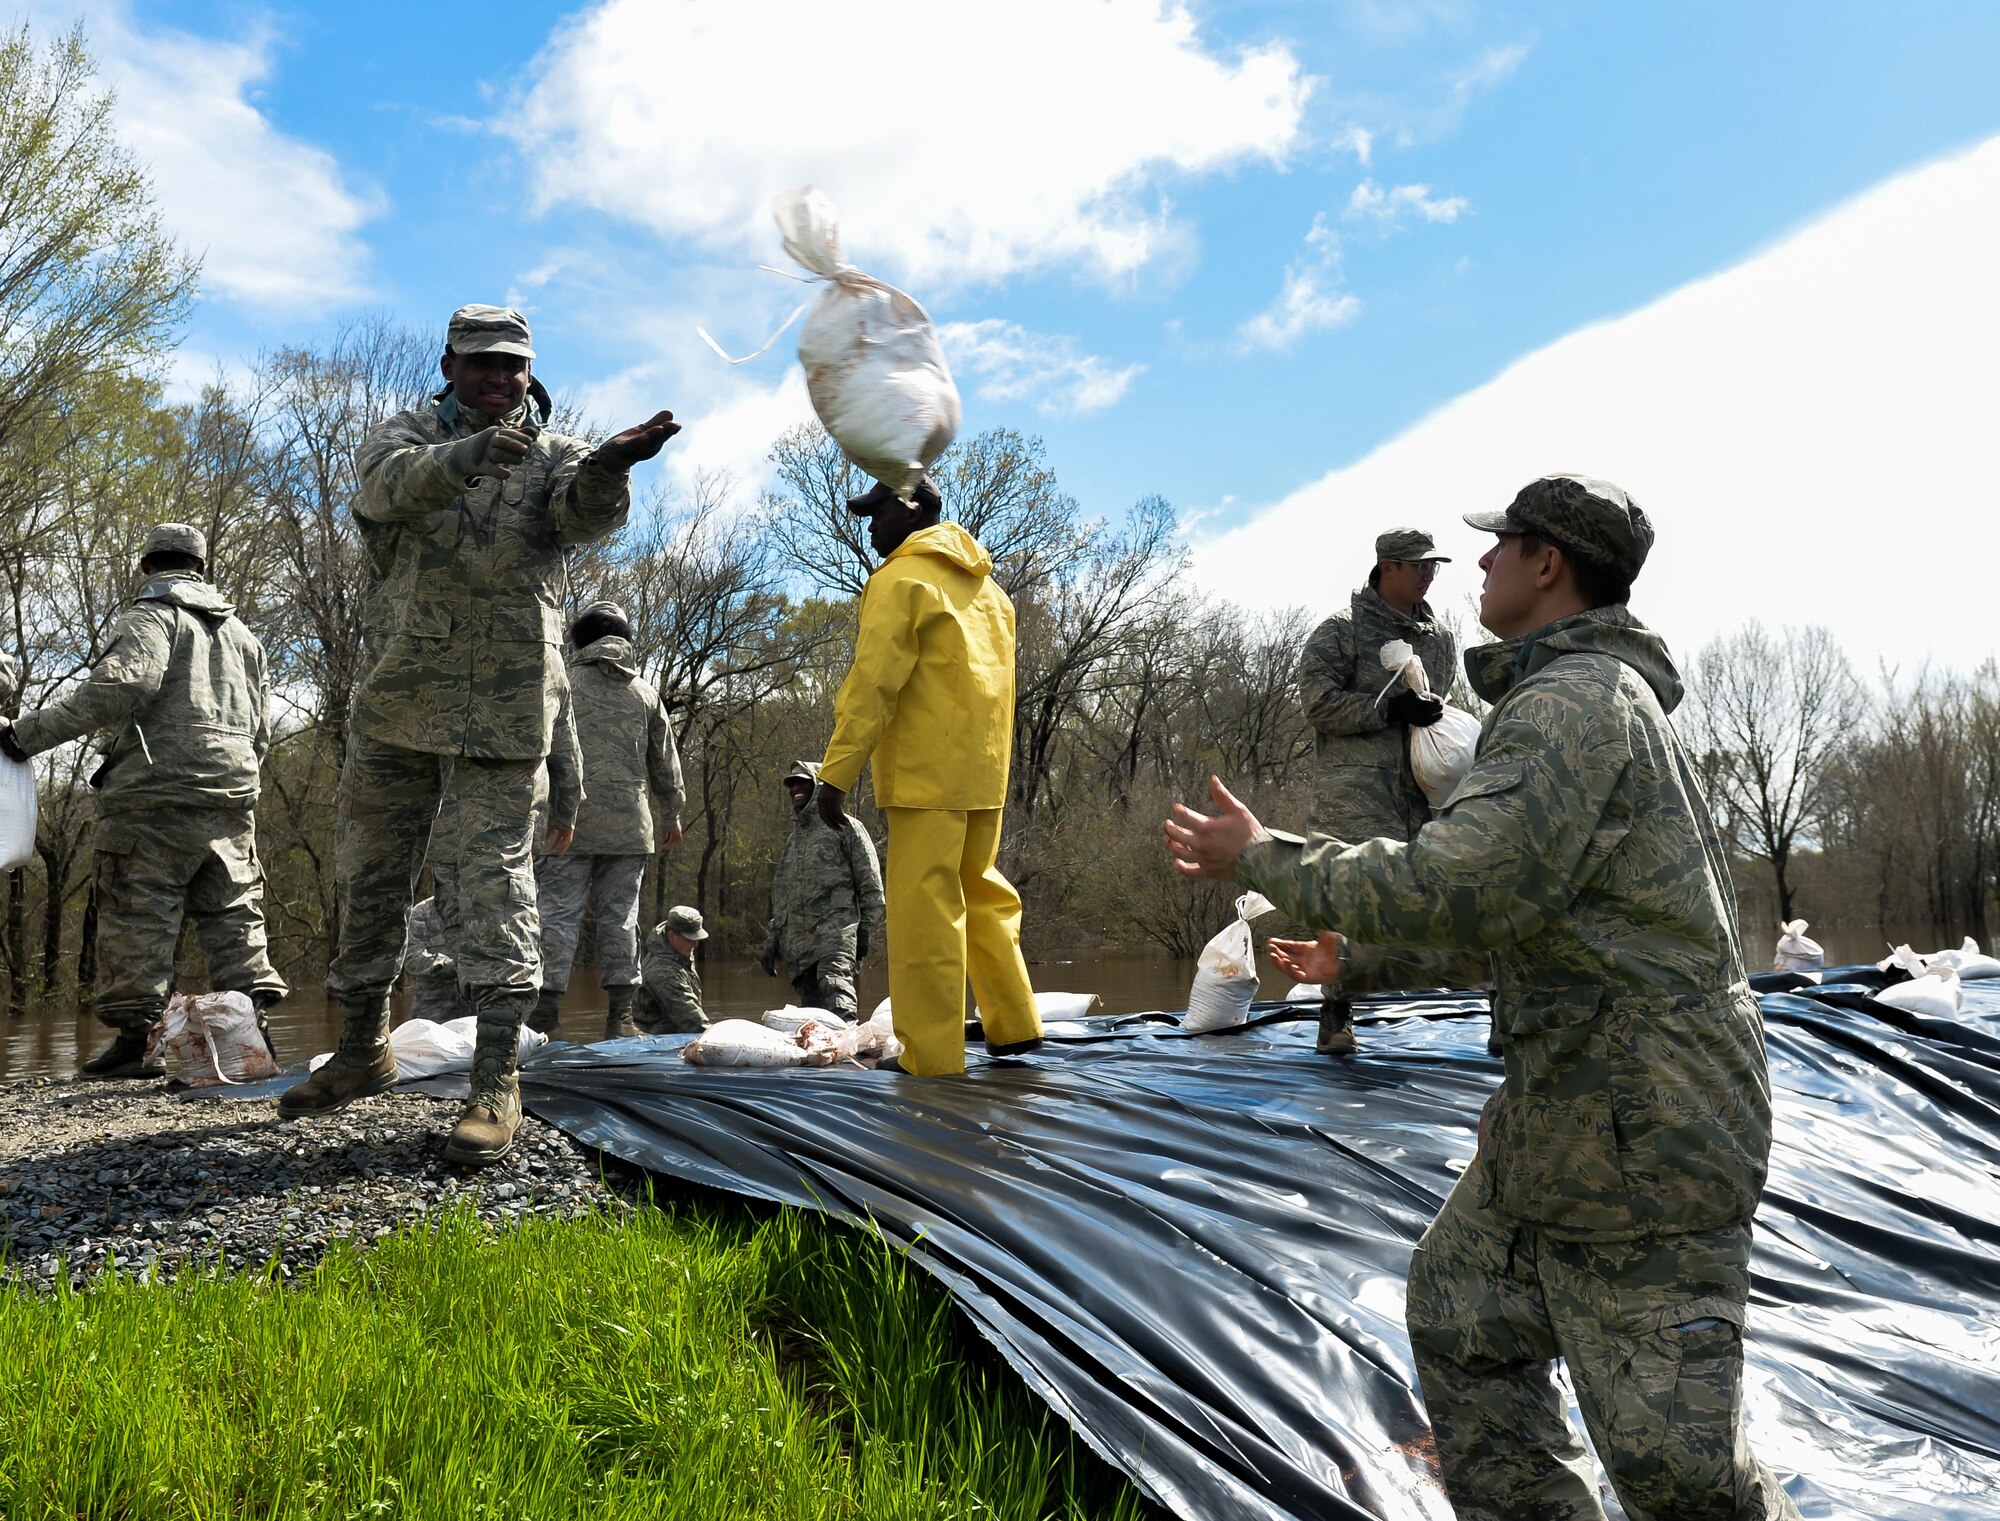 An Airman with the 2nd Logistics Readiness Squadron throws a sandbag to his partner in Bossier City, La., March 10, 2016. The Red Chute Bayou levee served as a barrier and kept waters out of surrounding neighborhoods. (U.S. Air Force photo/Senior Airman Mozer O. Da Cunha)